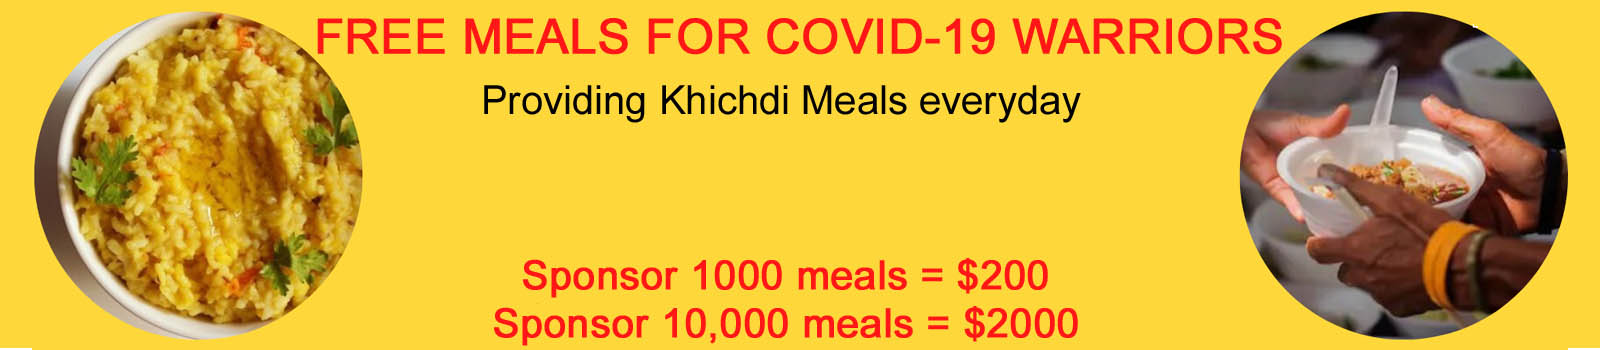 Join in the COVID-19 Support Drive